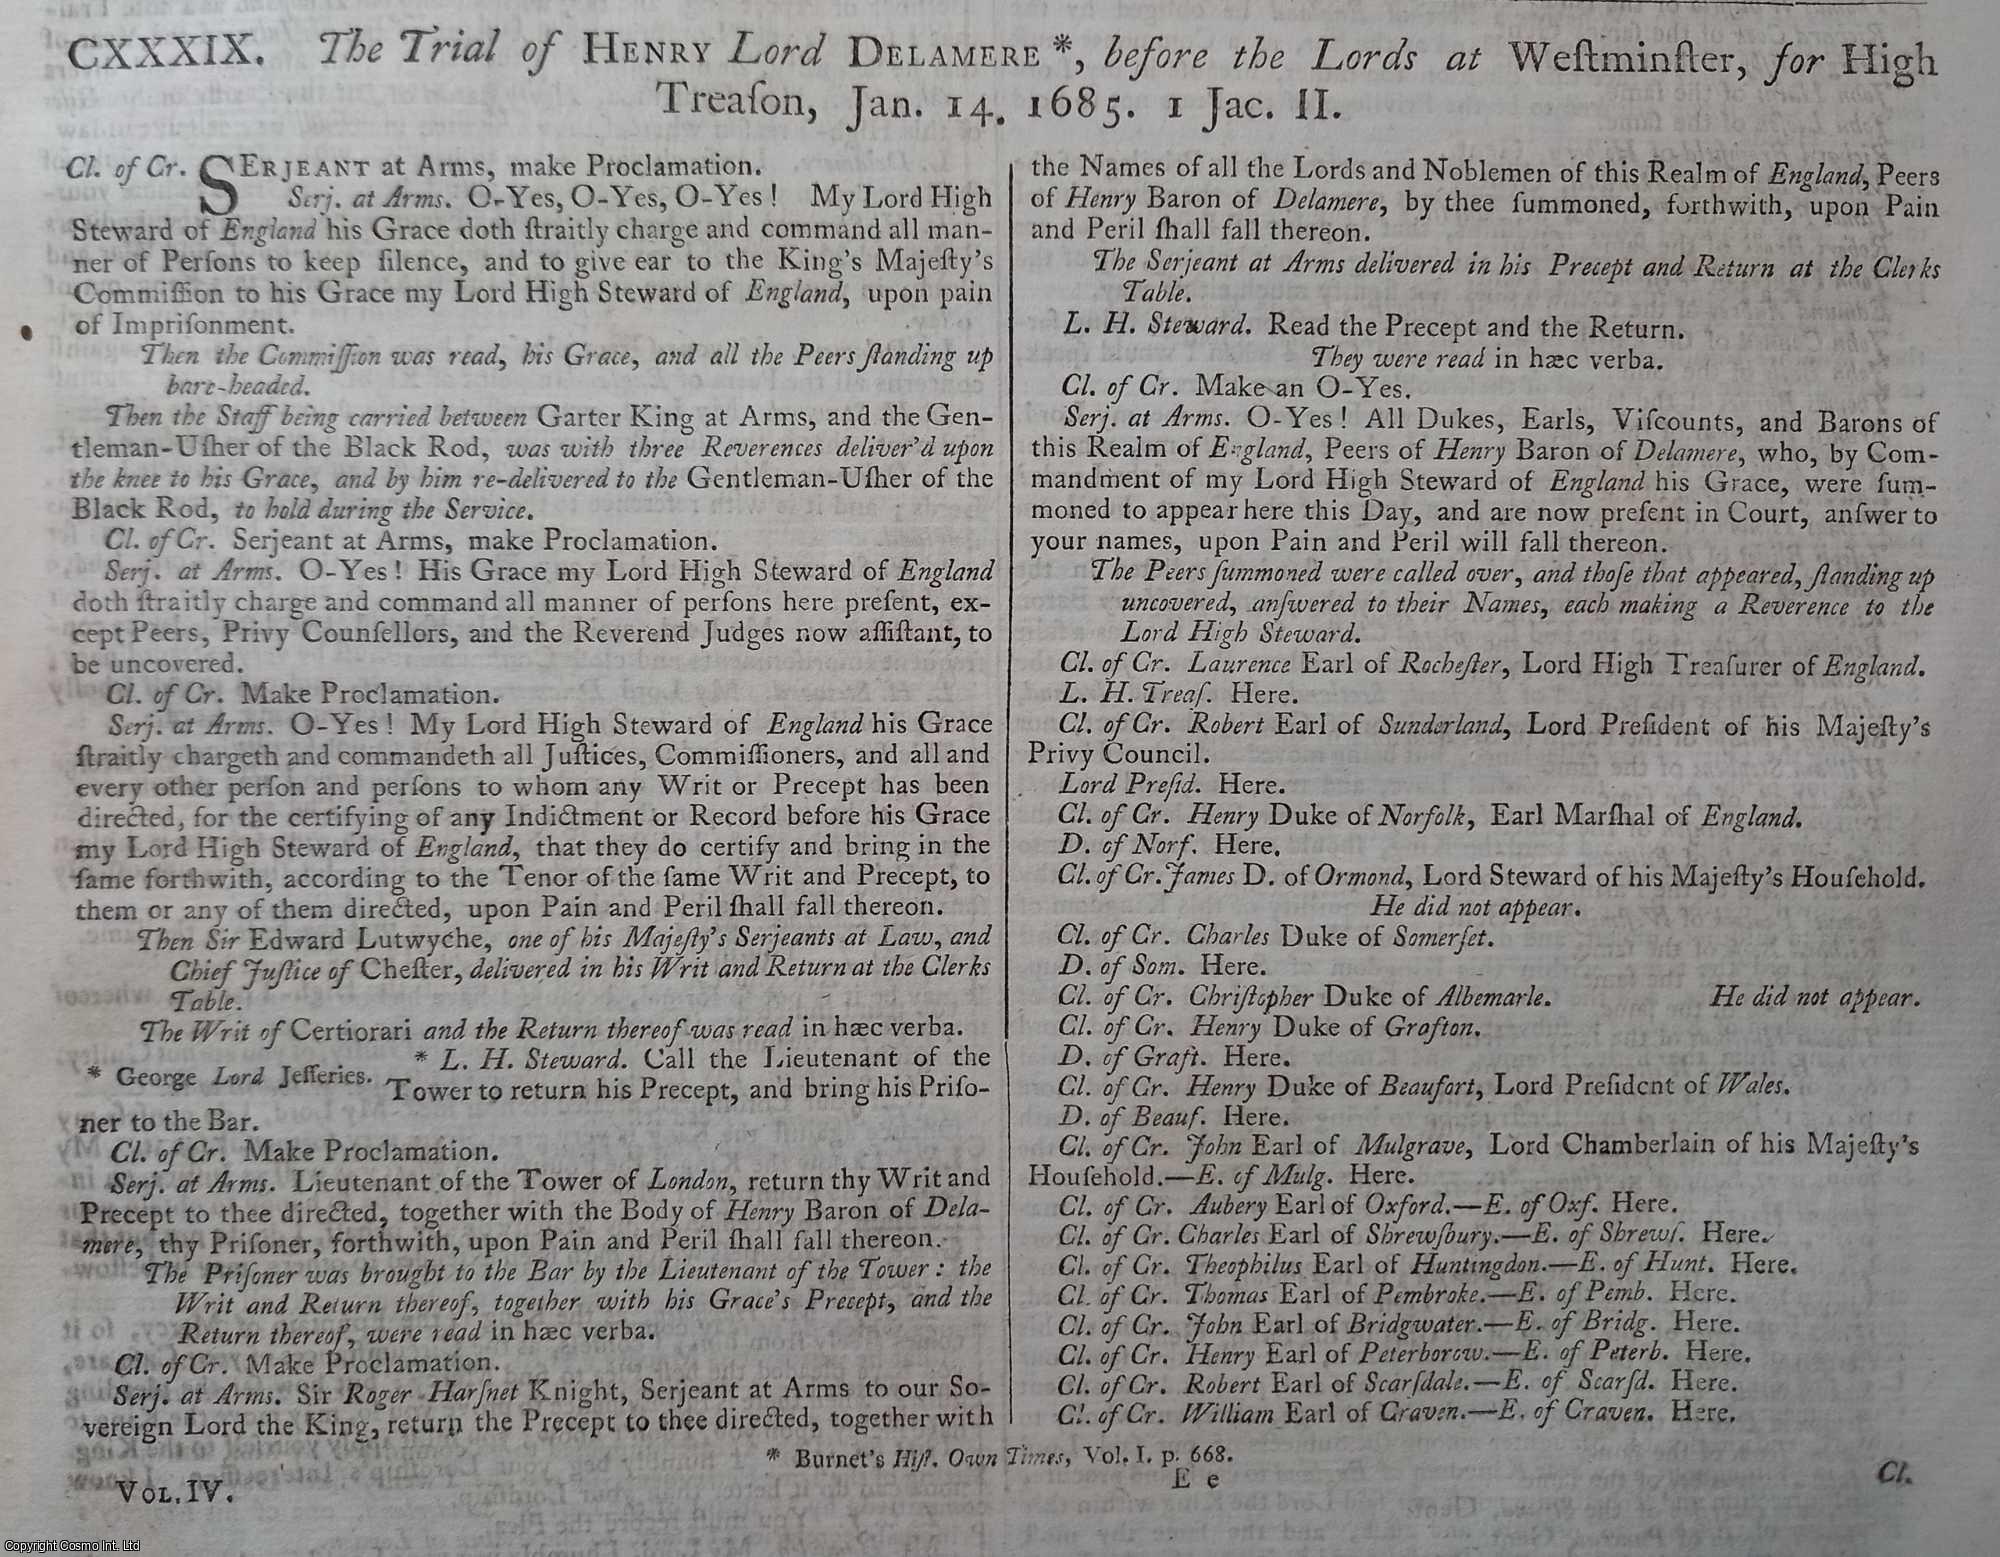 [Trial] - The Trial of Henry, Lord Delamere, for High Treason, in being concerned in Monmouth's Conspiracy, 1685. An original article from the Collected State Trials.